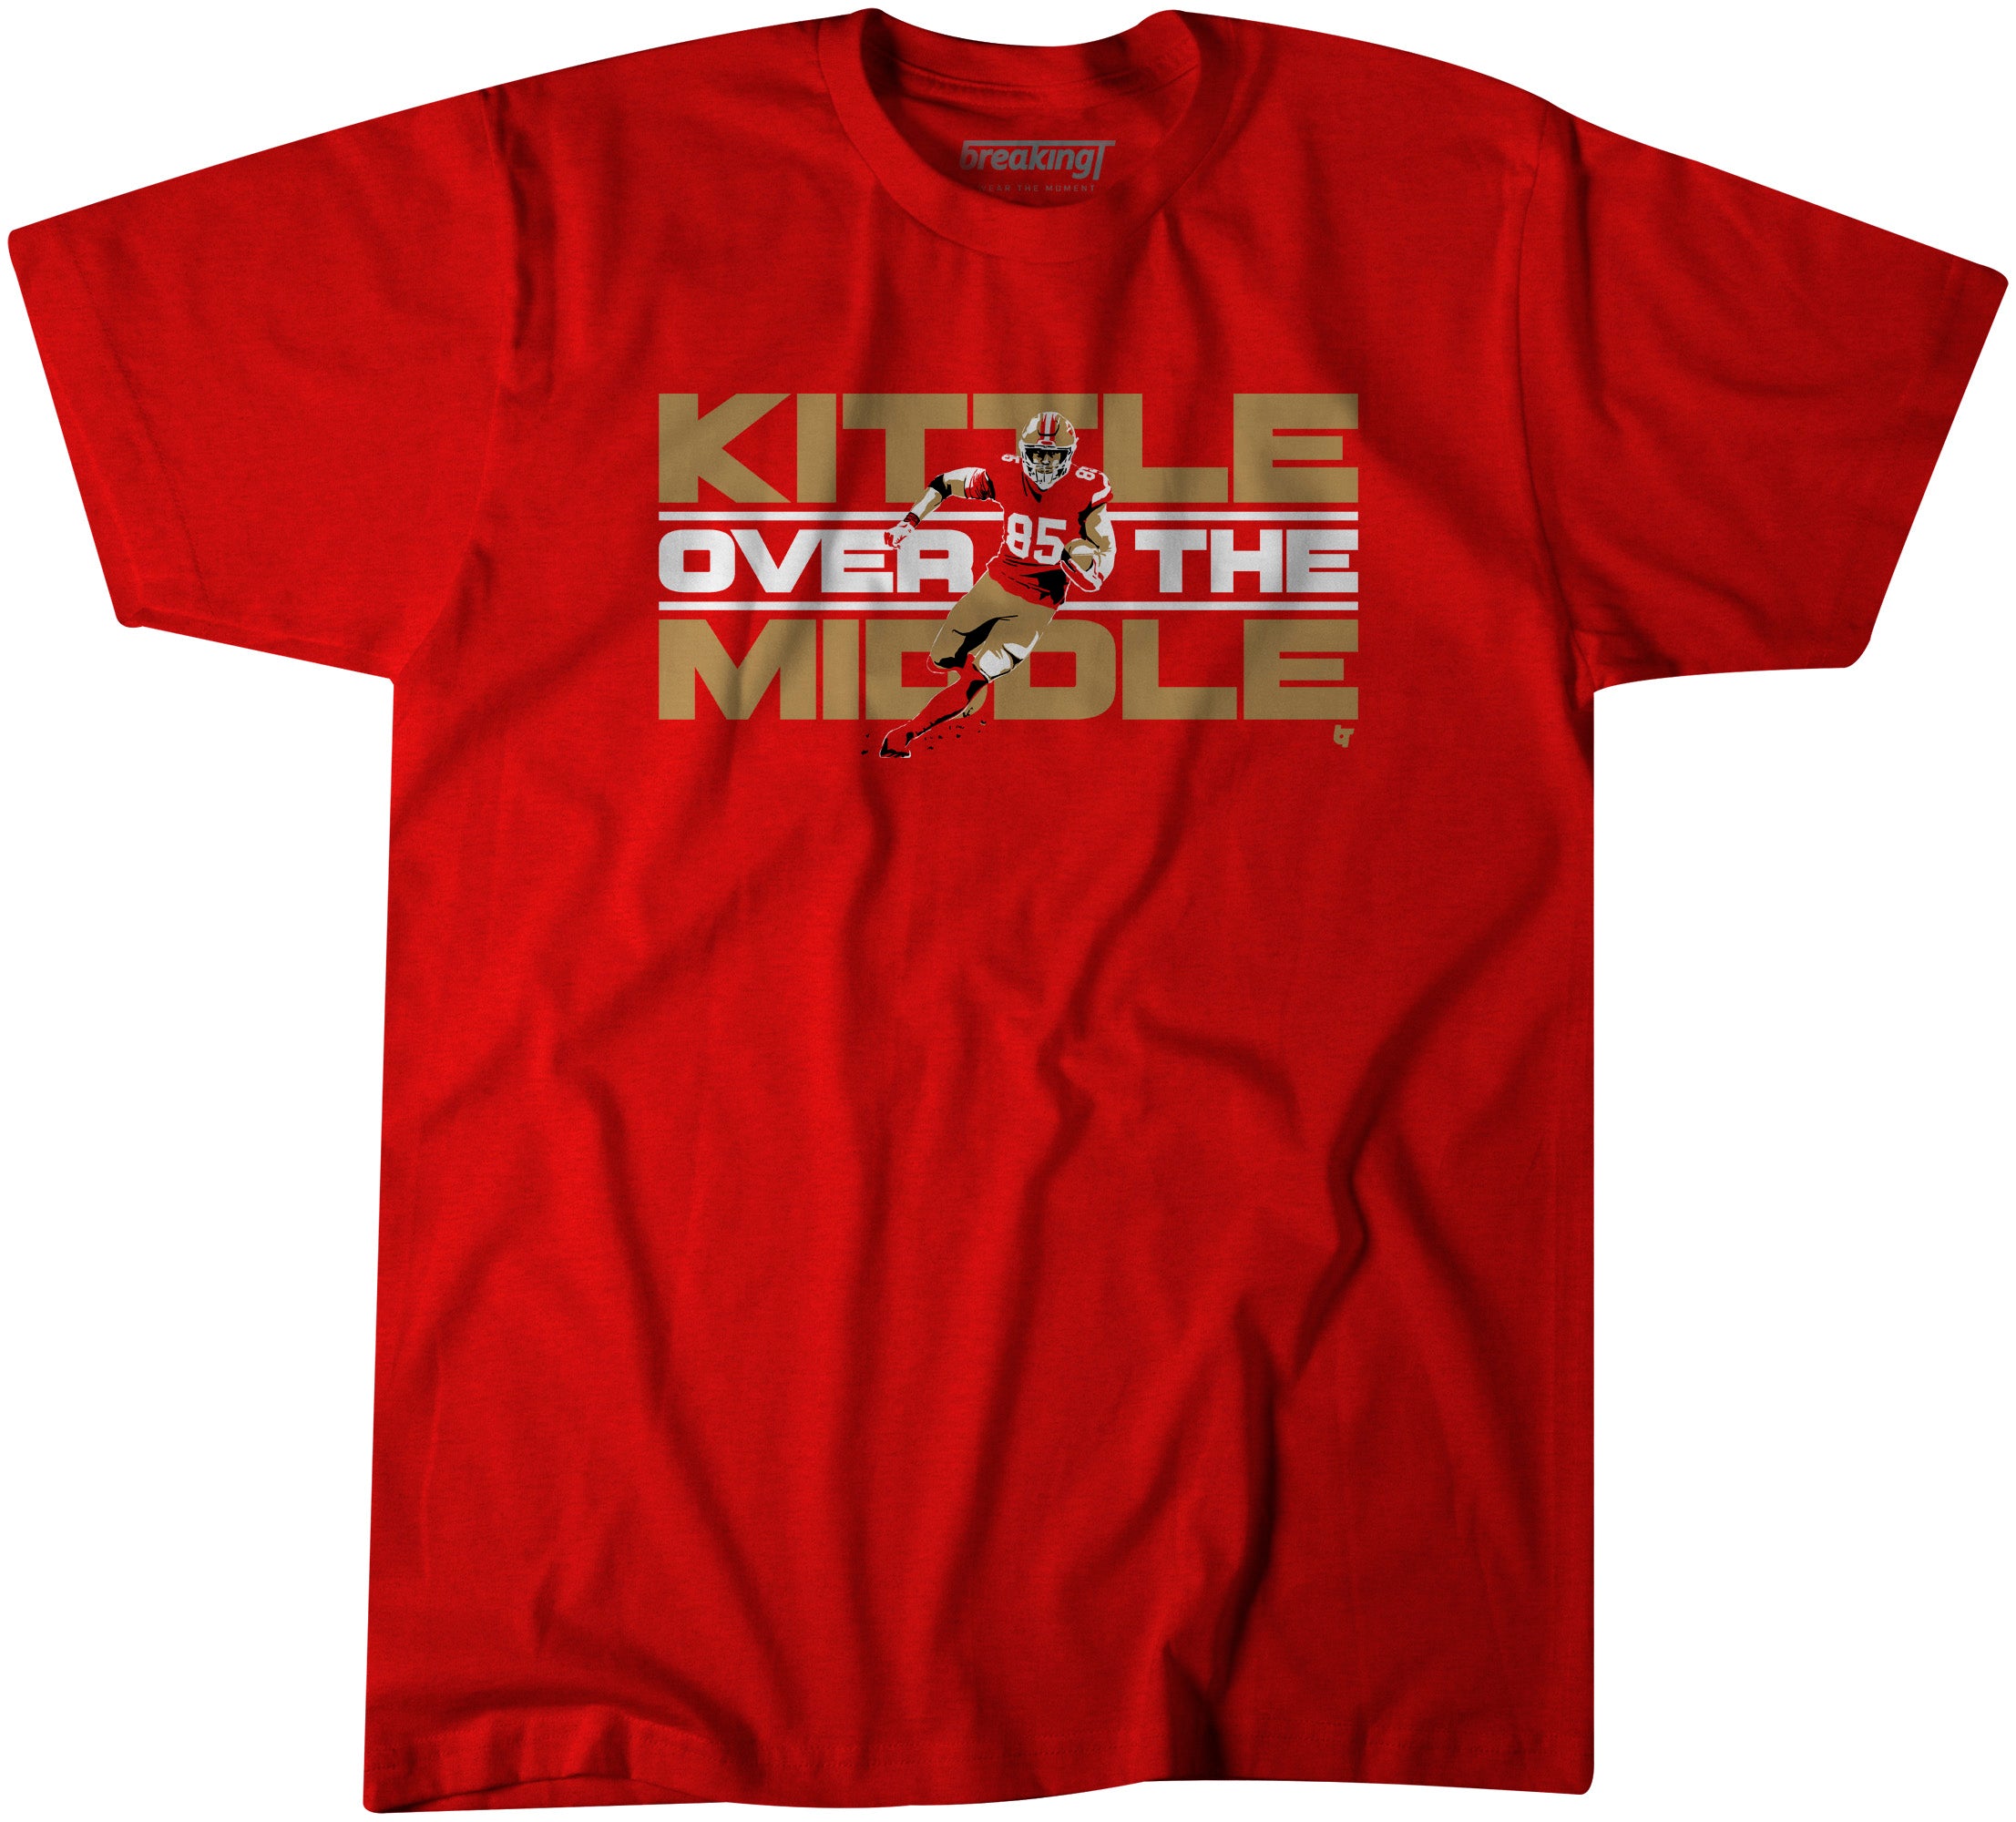 George Kittle: Over The Middle, Small / Adult T-Shirt - Pro Football - Red - Sports Fan Gear | BreakingT